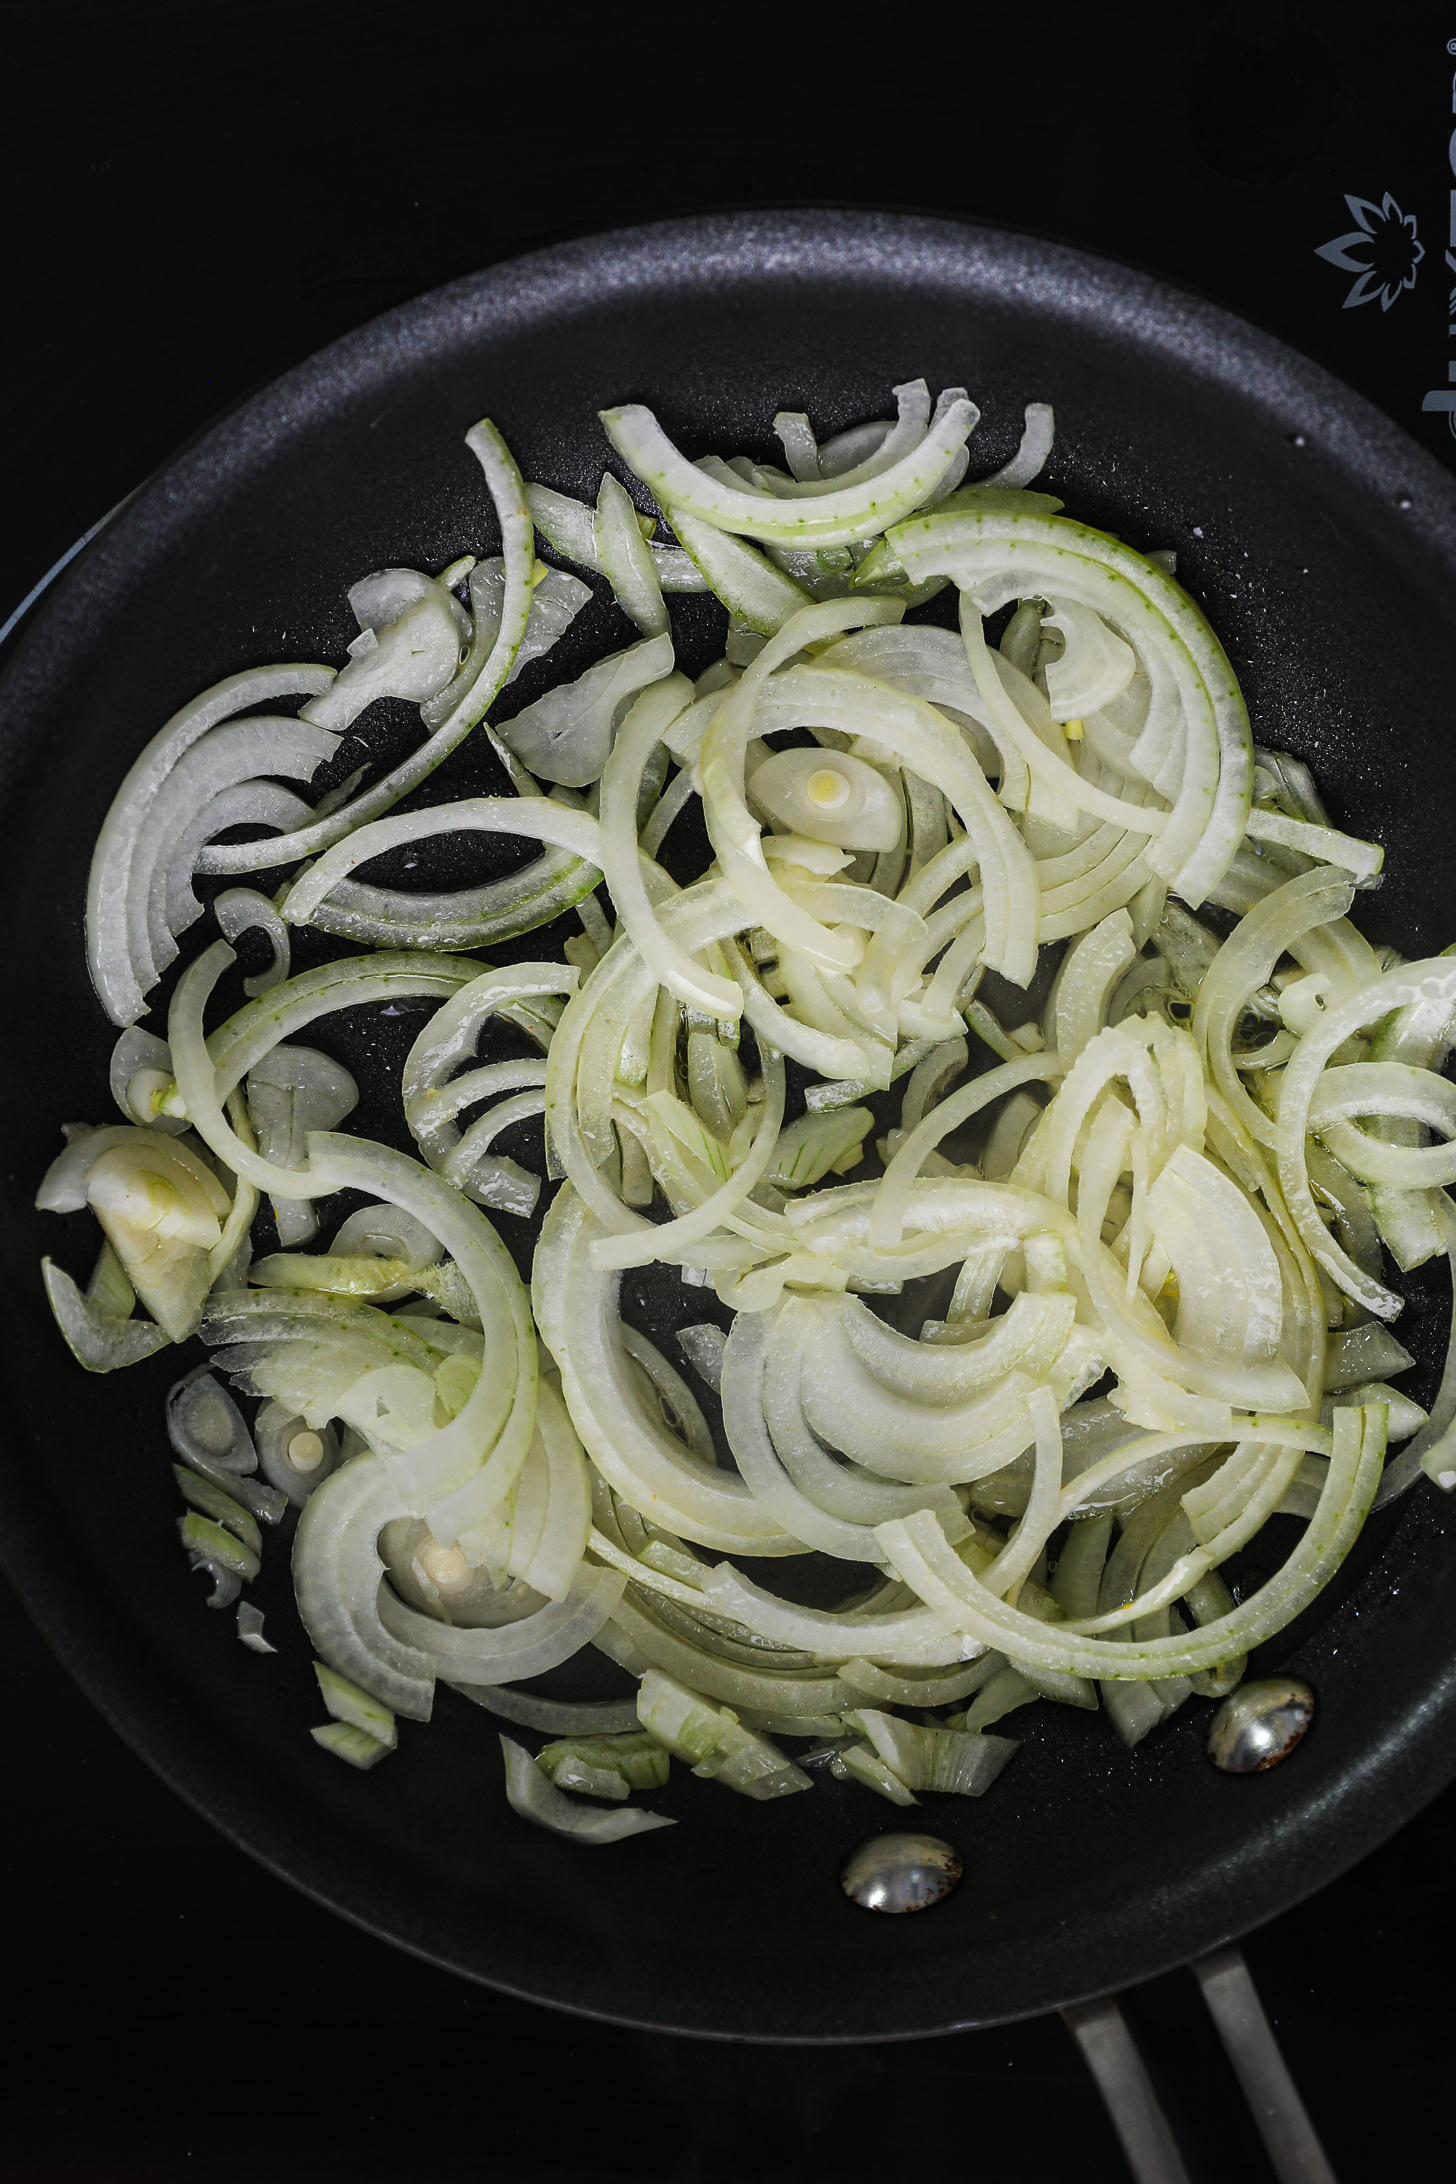 Onion slices in oil in a fry pan.